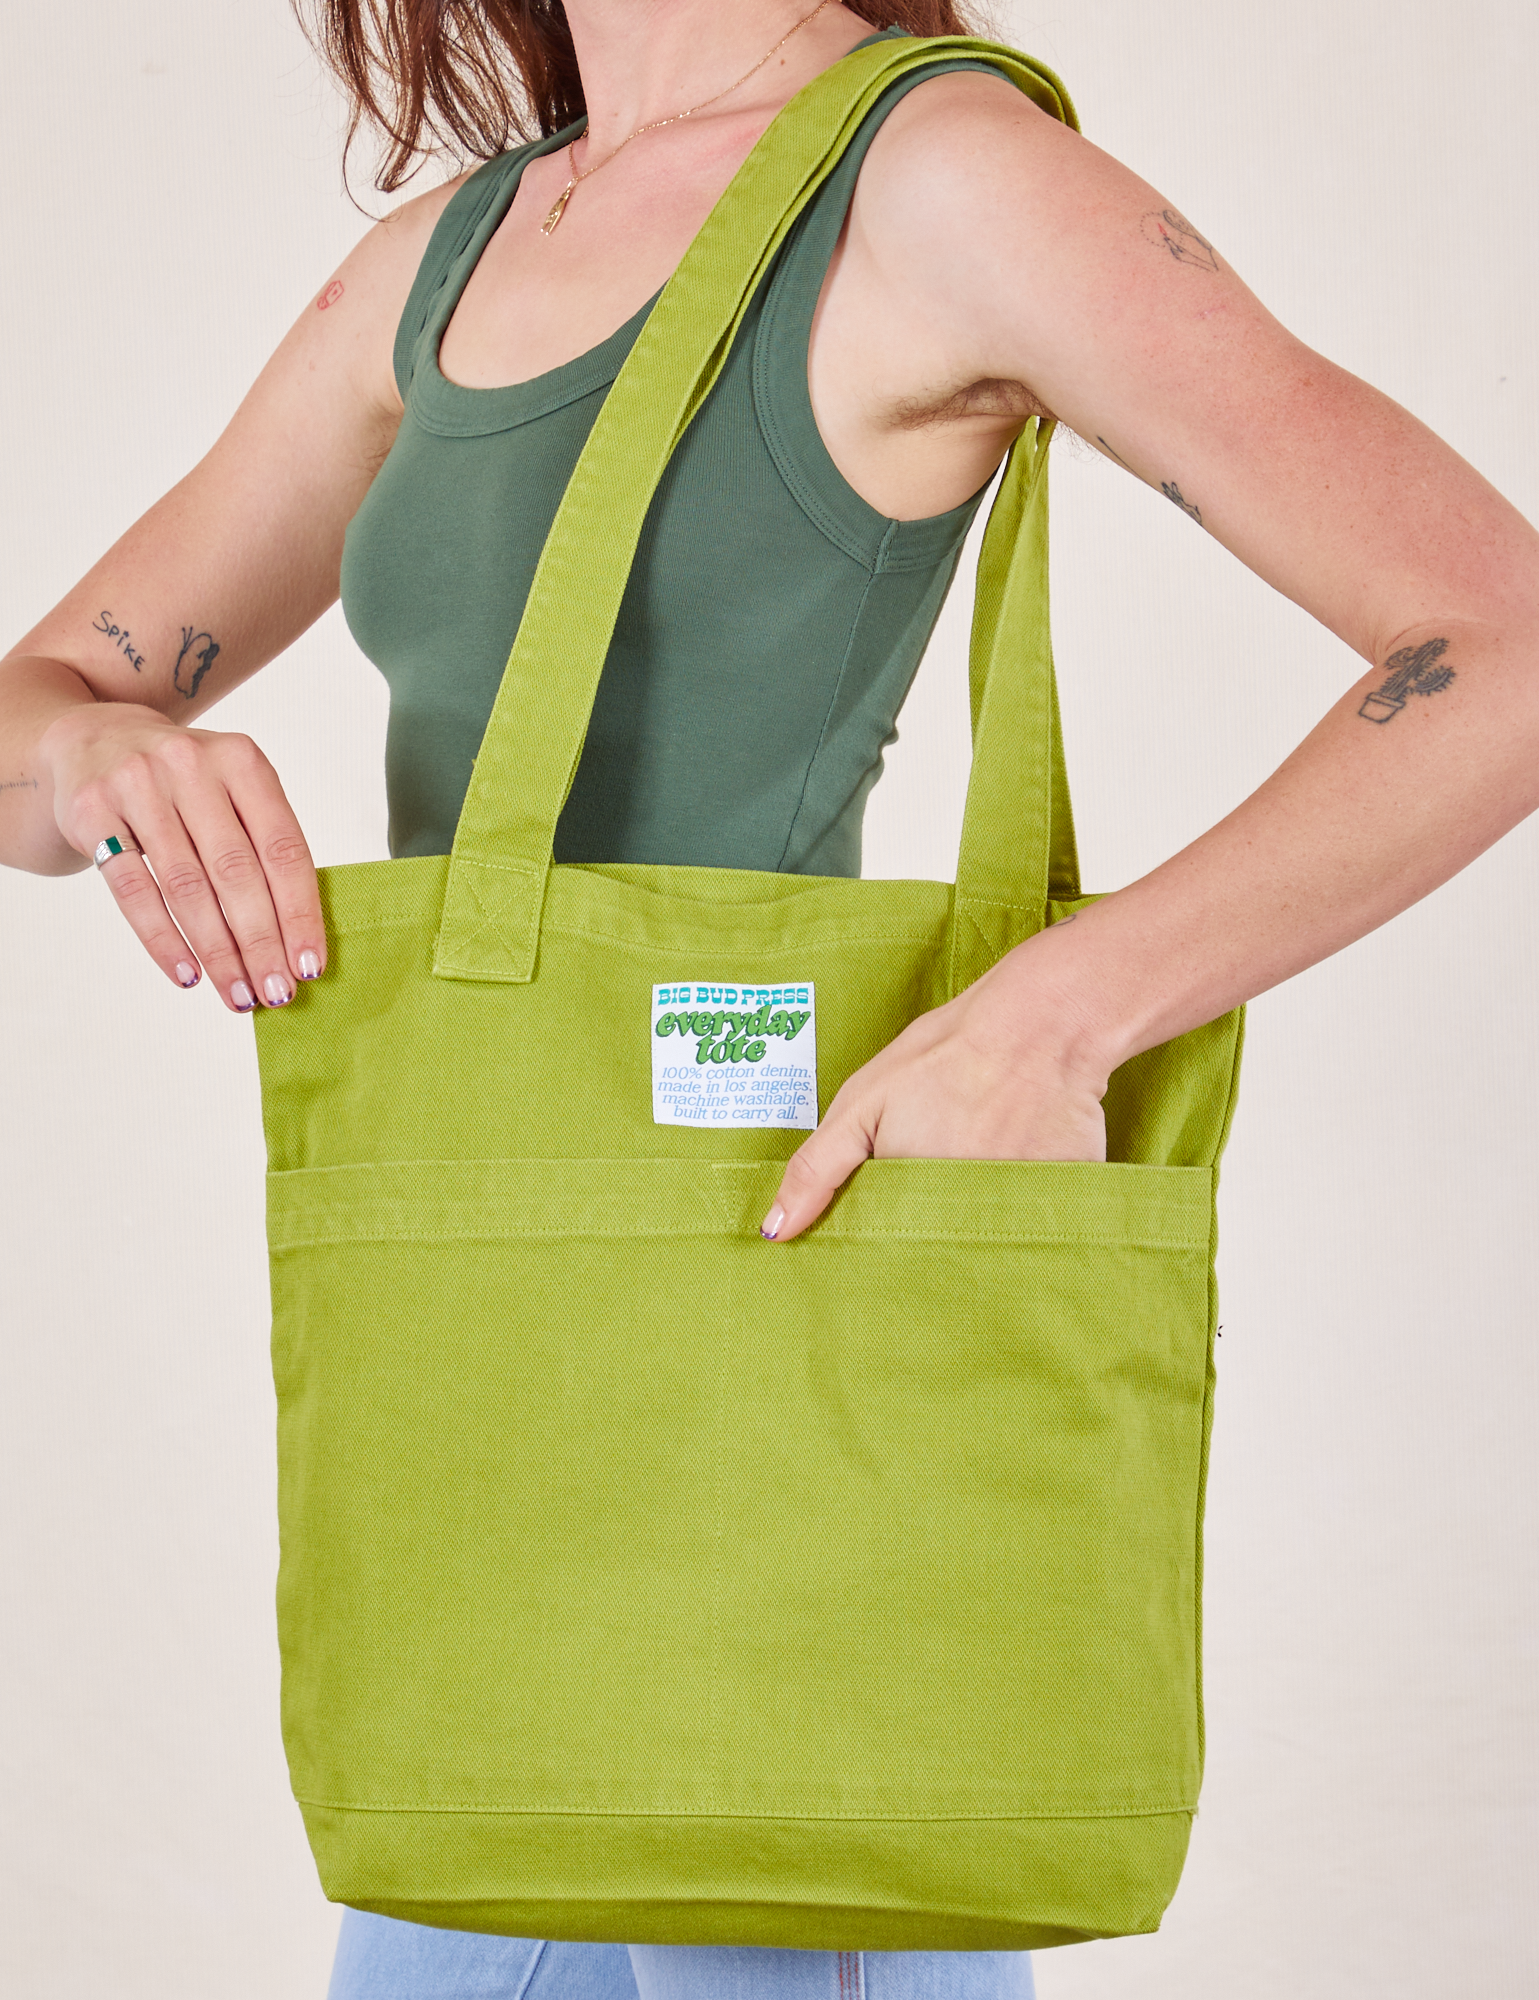 Everyday Tote Bag in Gross Green worn by model